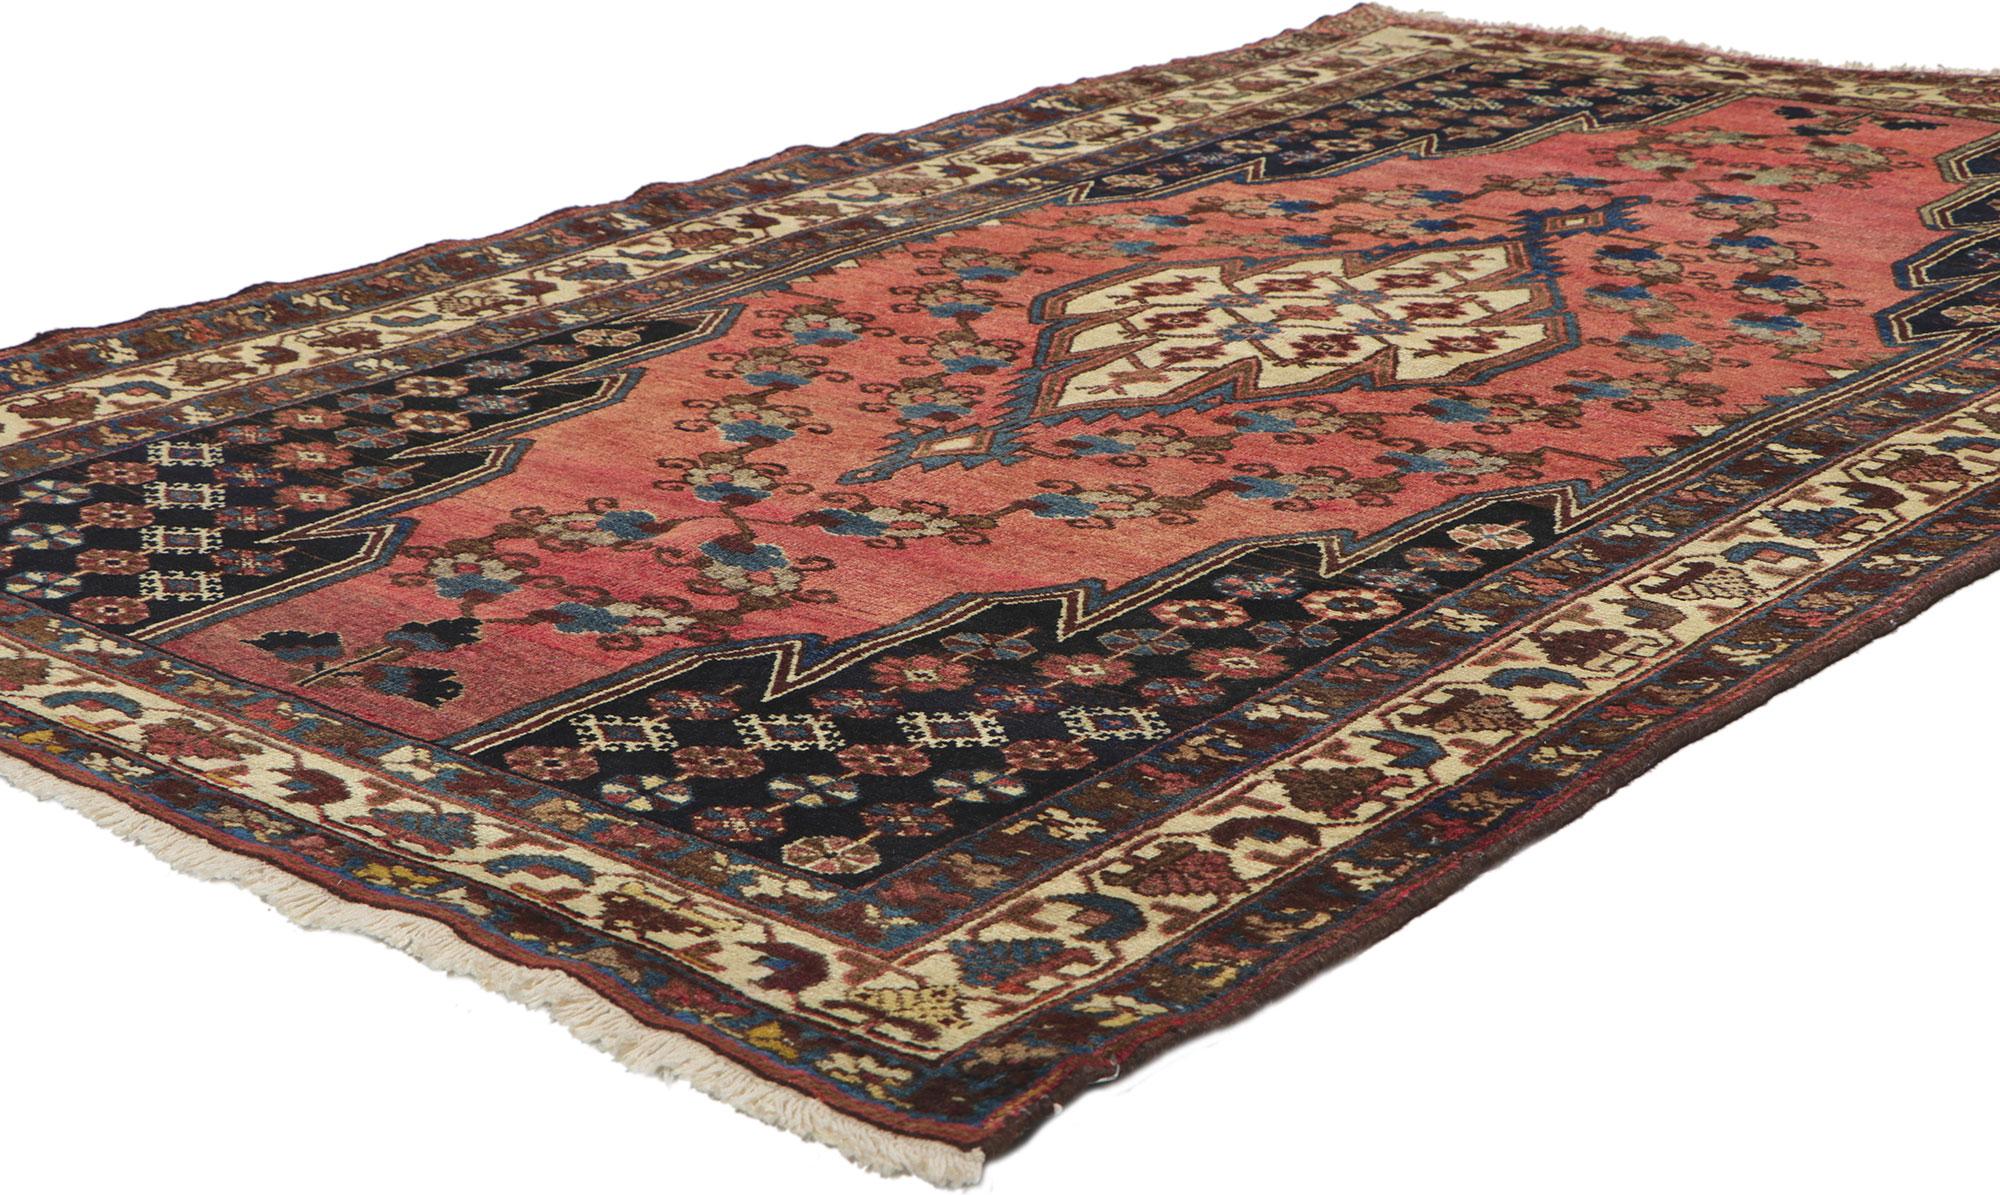 60966 Antique Persian Hamadan Rug, 04'01 x 06'05.
Midcentury Modern meets tribal enchantment in this hand knotted wool antique Persian Hamadan rug. Like a time capsule from the caraismatic nomads, it boasts an intrinsic tribal design that's sure to